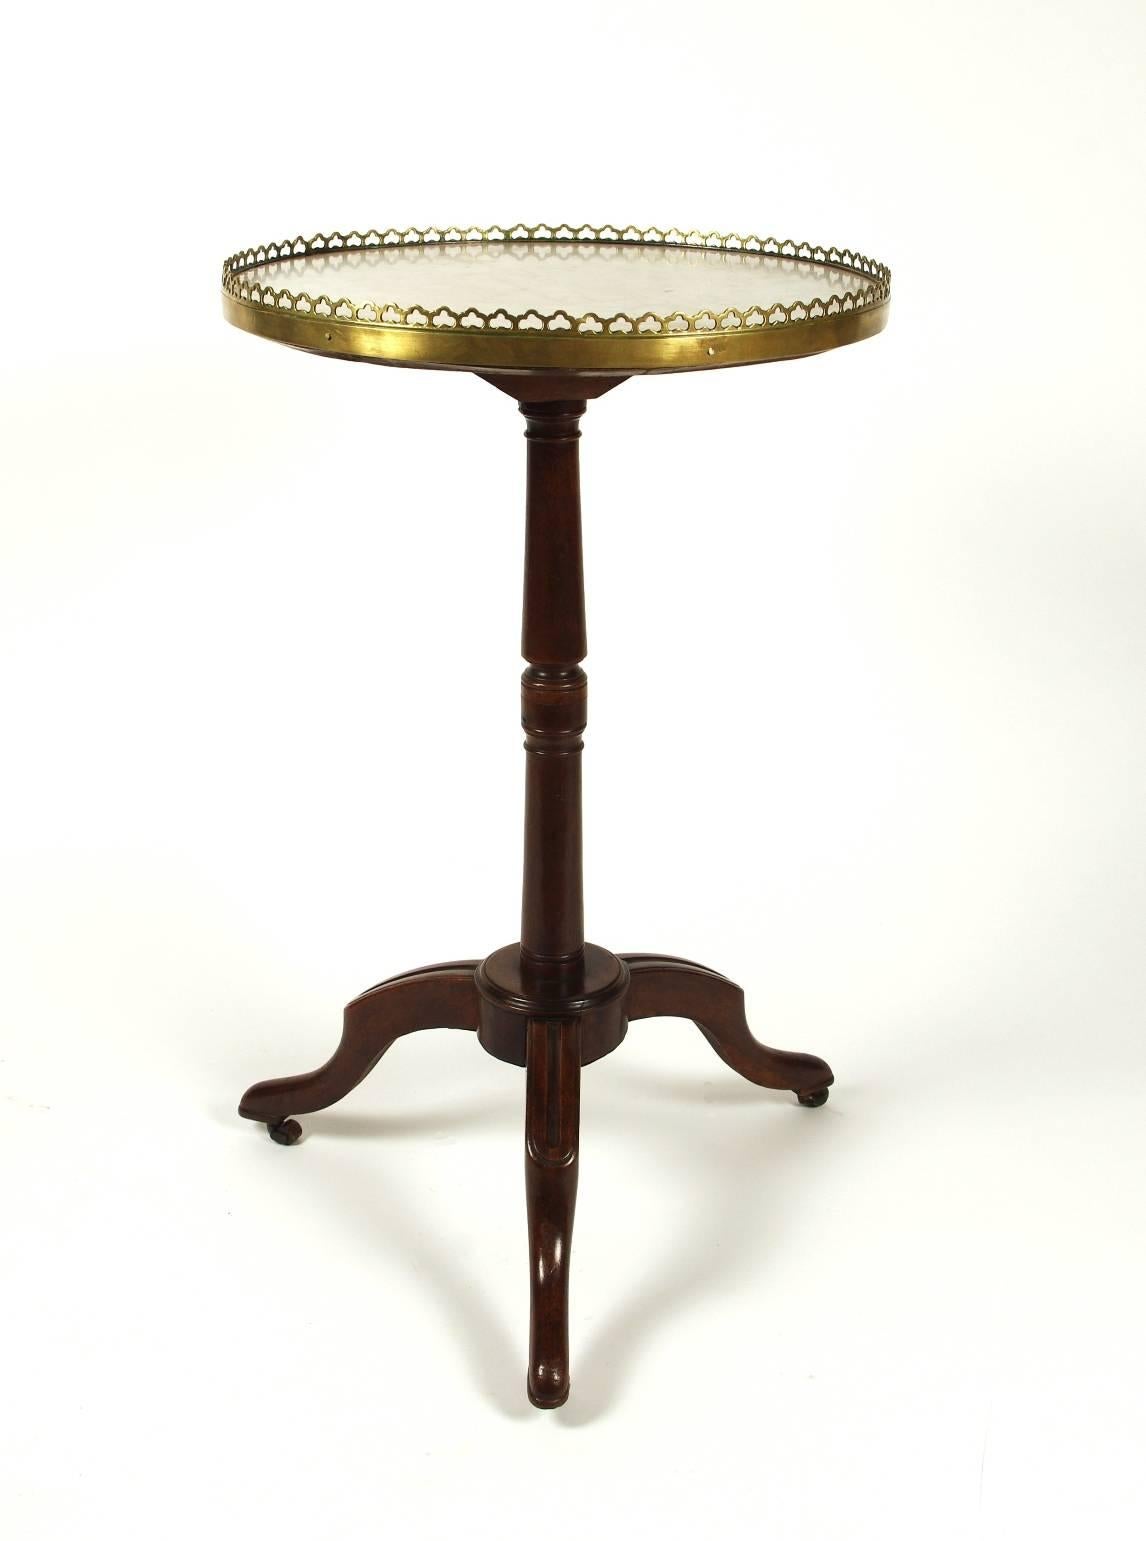 Directoire walnut Guéridon, the white marble top with a pierced brass gallery; the turned post supported by three cabriole legs with carved knees. Stamped J P Dusautoy (see photo).

There are a few small stains in the marble at about 9:00, visible